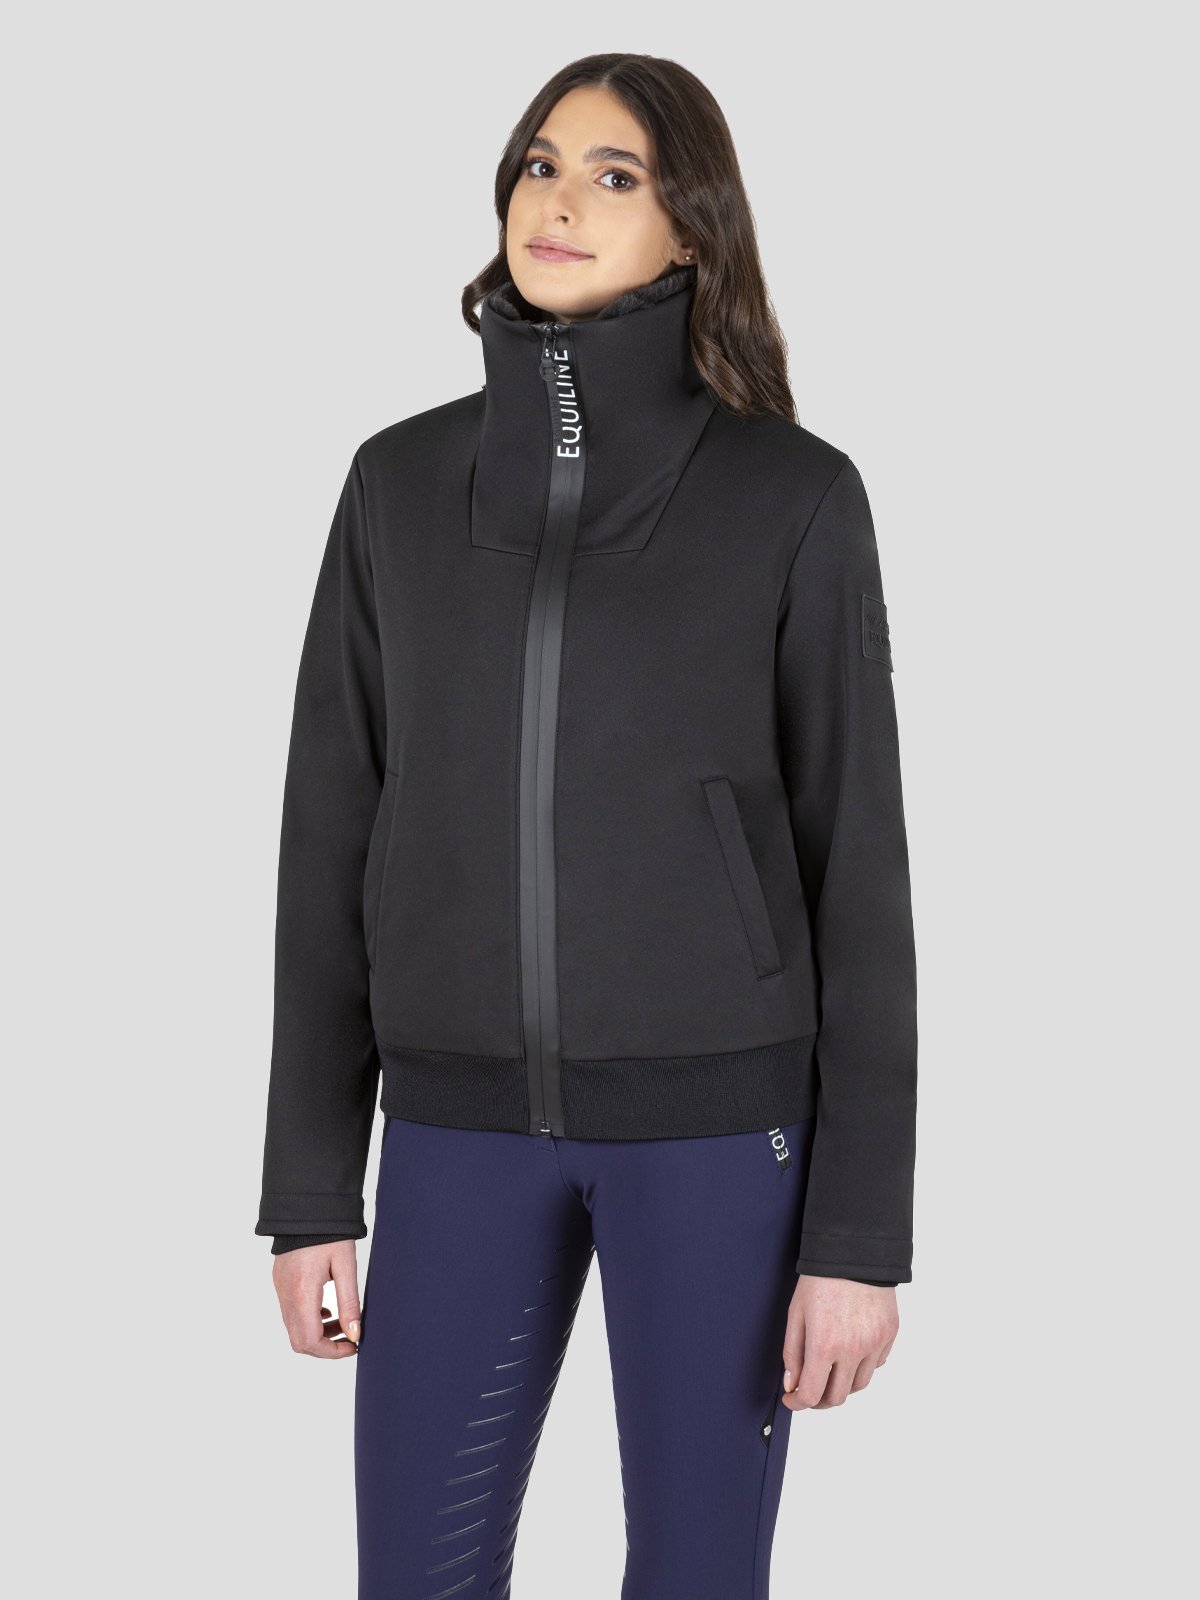 CerfeC Women's Eco-Fur Lined Soft Shell - Equiline America